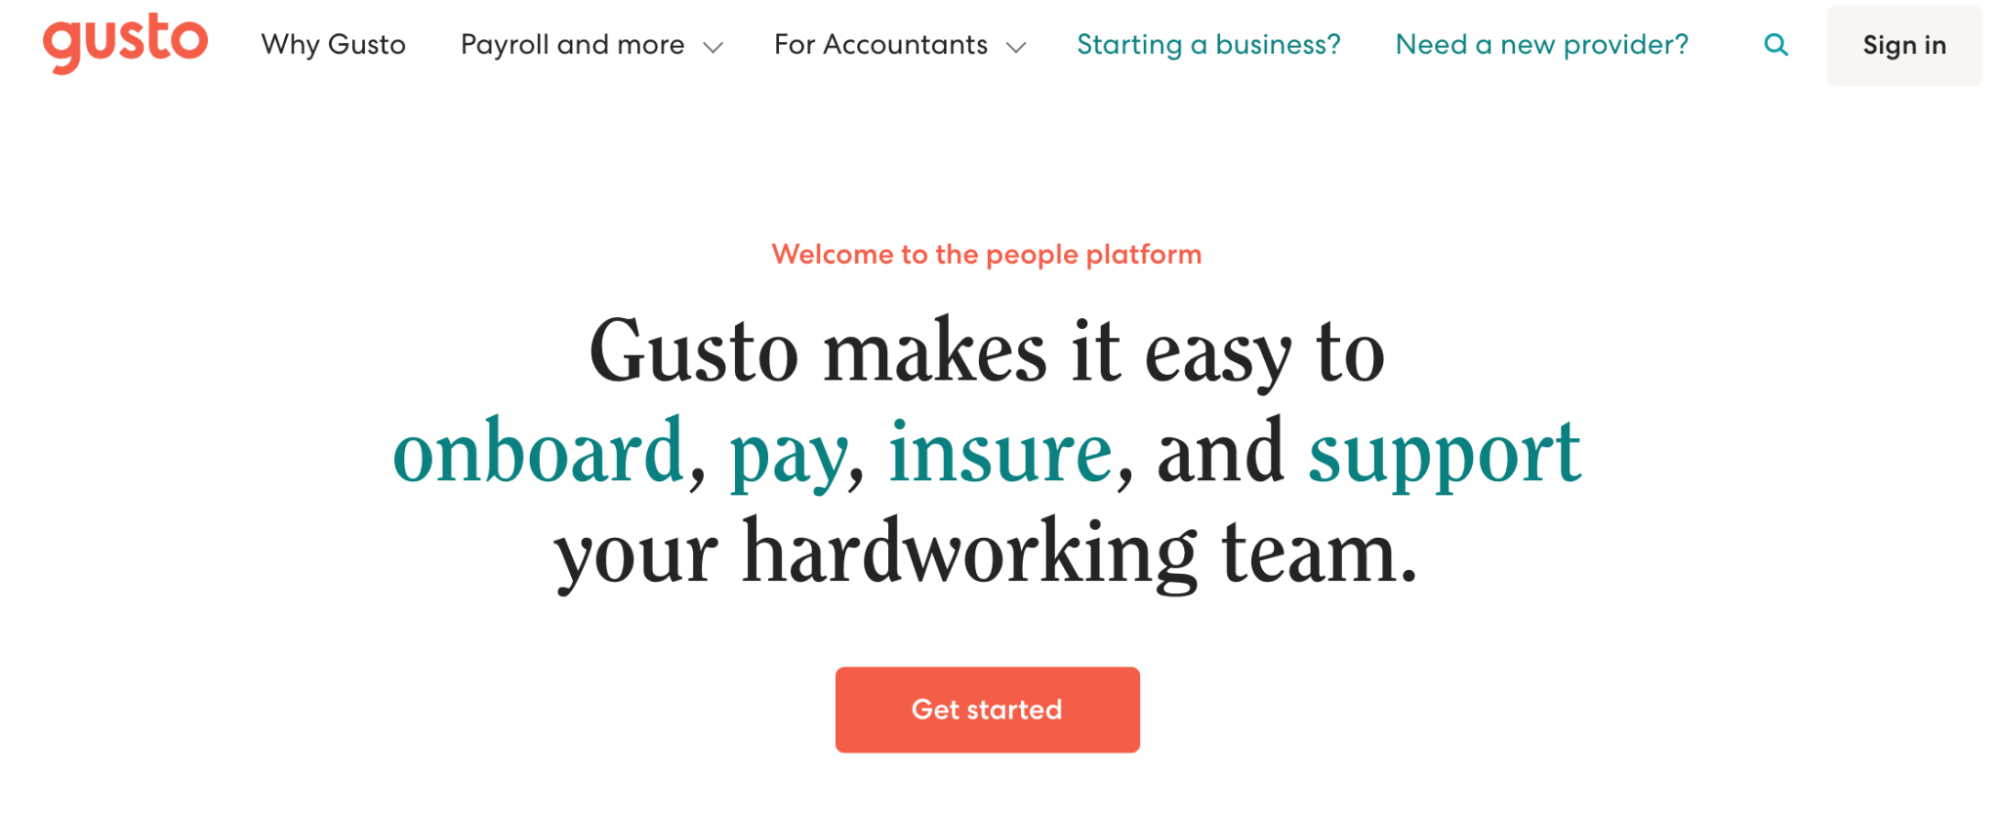 Gusto payroll and HR services solution homepage.